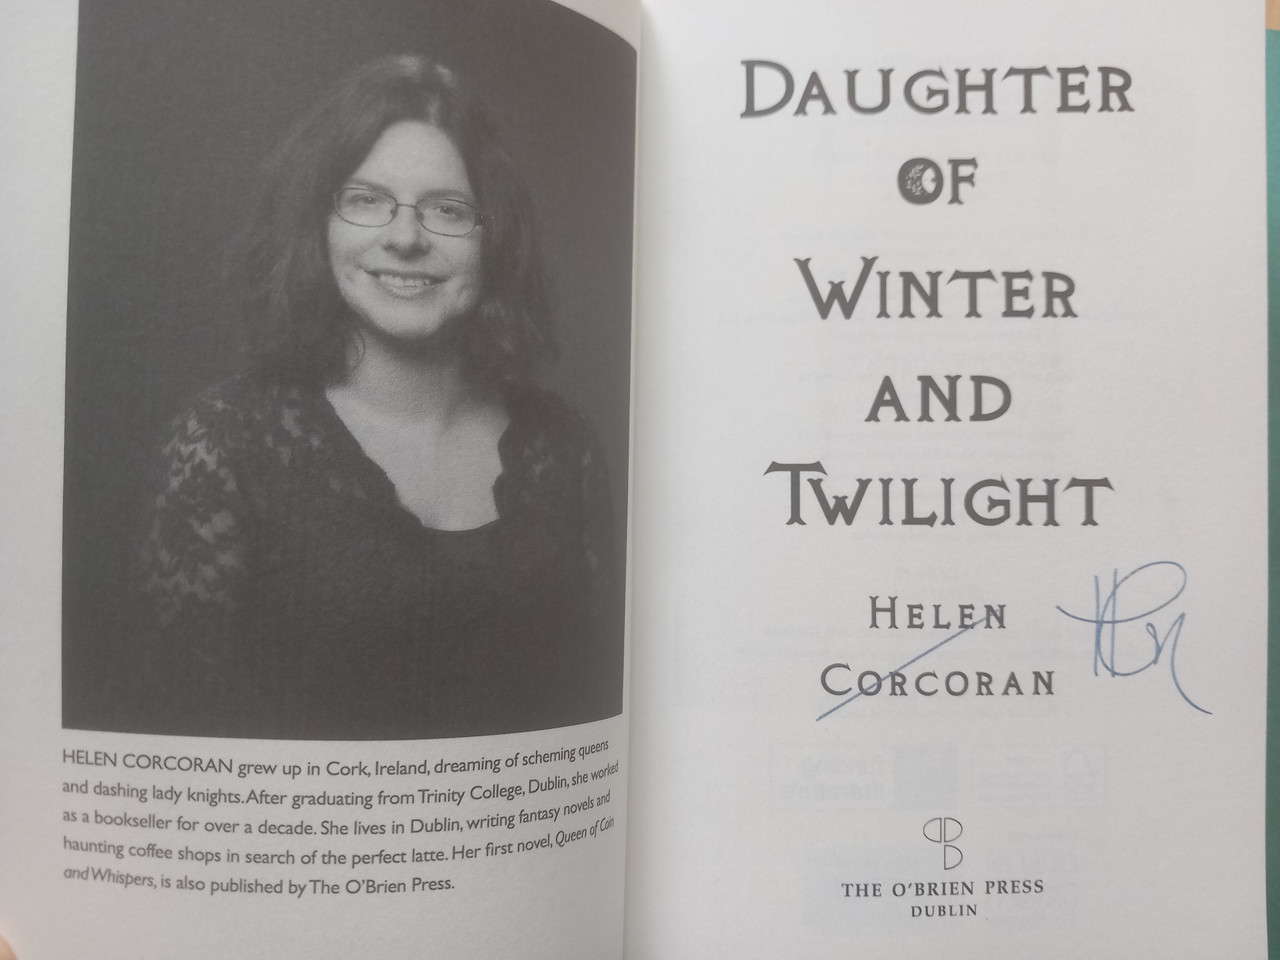 Helen Corcoran - Daughter of Winter and Twilight - PB - SEPTEMBER 2023  - BRAND NEW - SIGNED